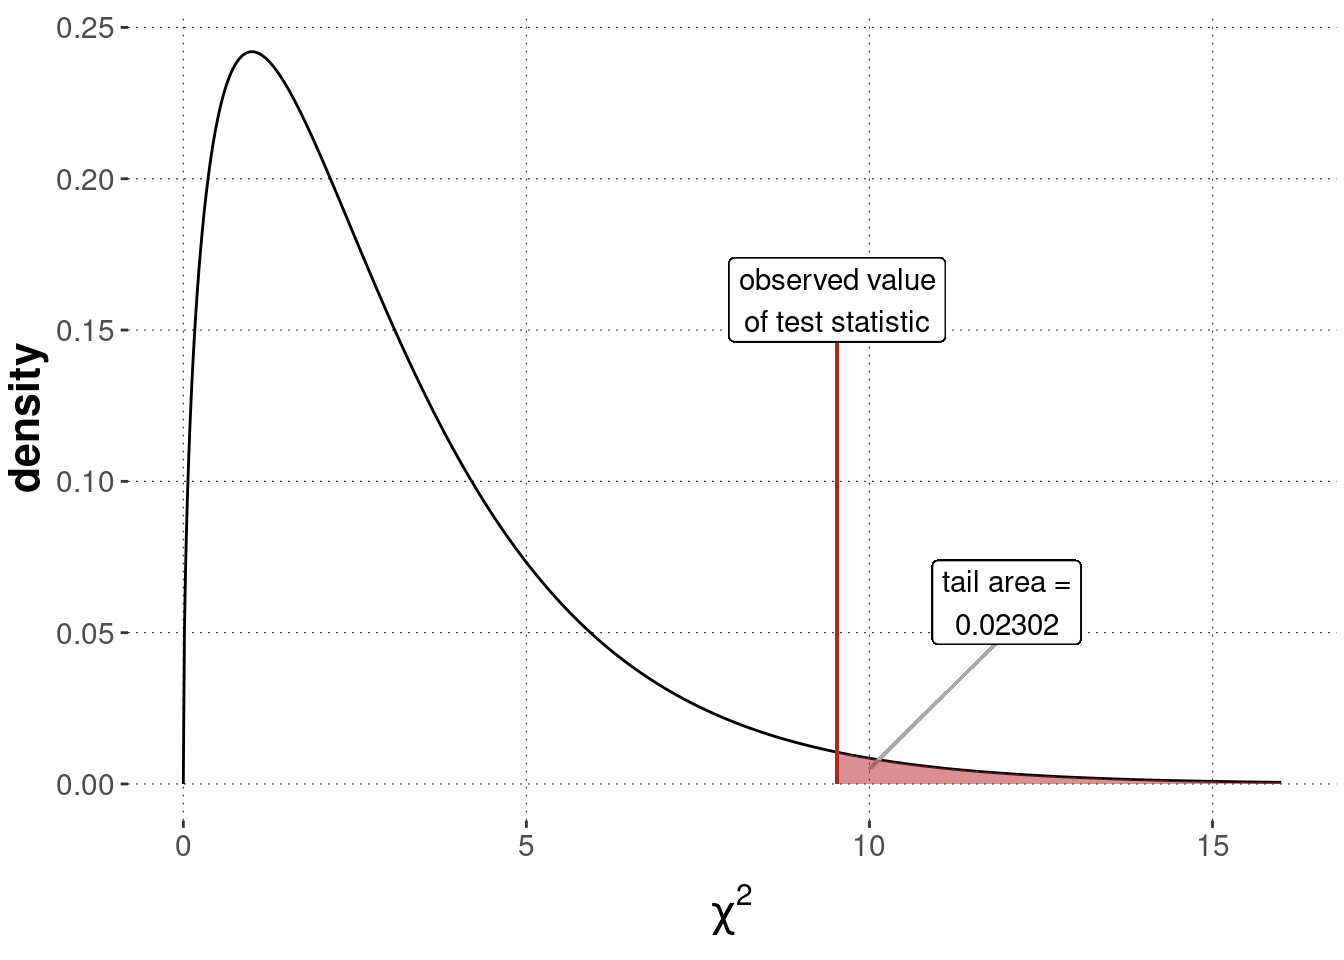 Sampling distribution for a Pearson's $\chi^2$-test of goodness of fit ($\chi^2$-distribution with $k-1 = 3$ degrees of freedom), testing a flat baseline null hypothesis based on the BLJM data.